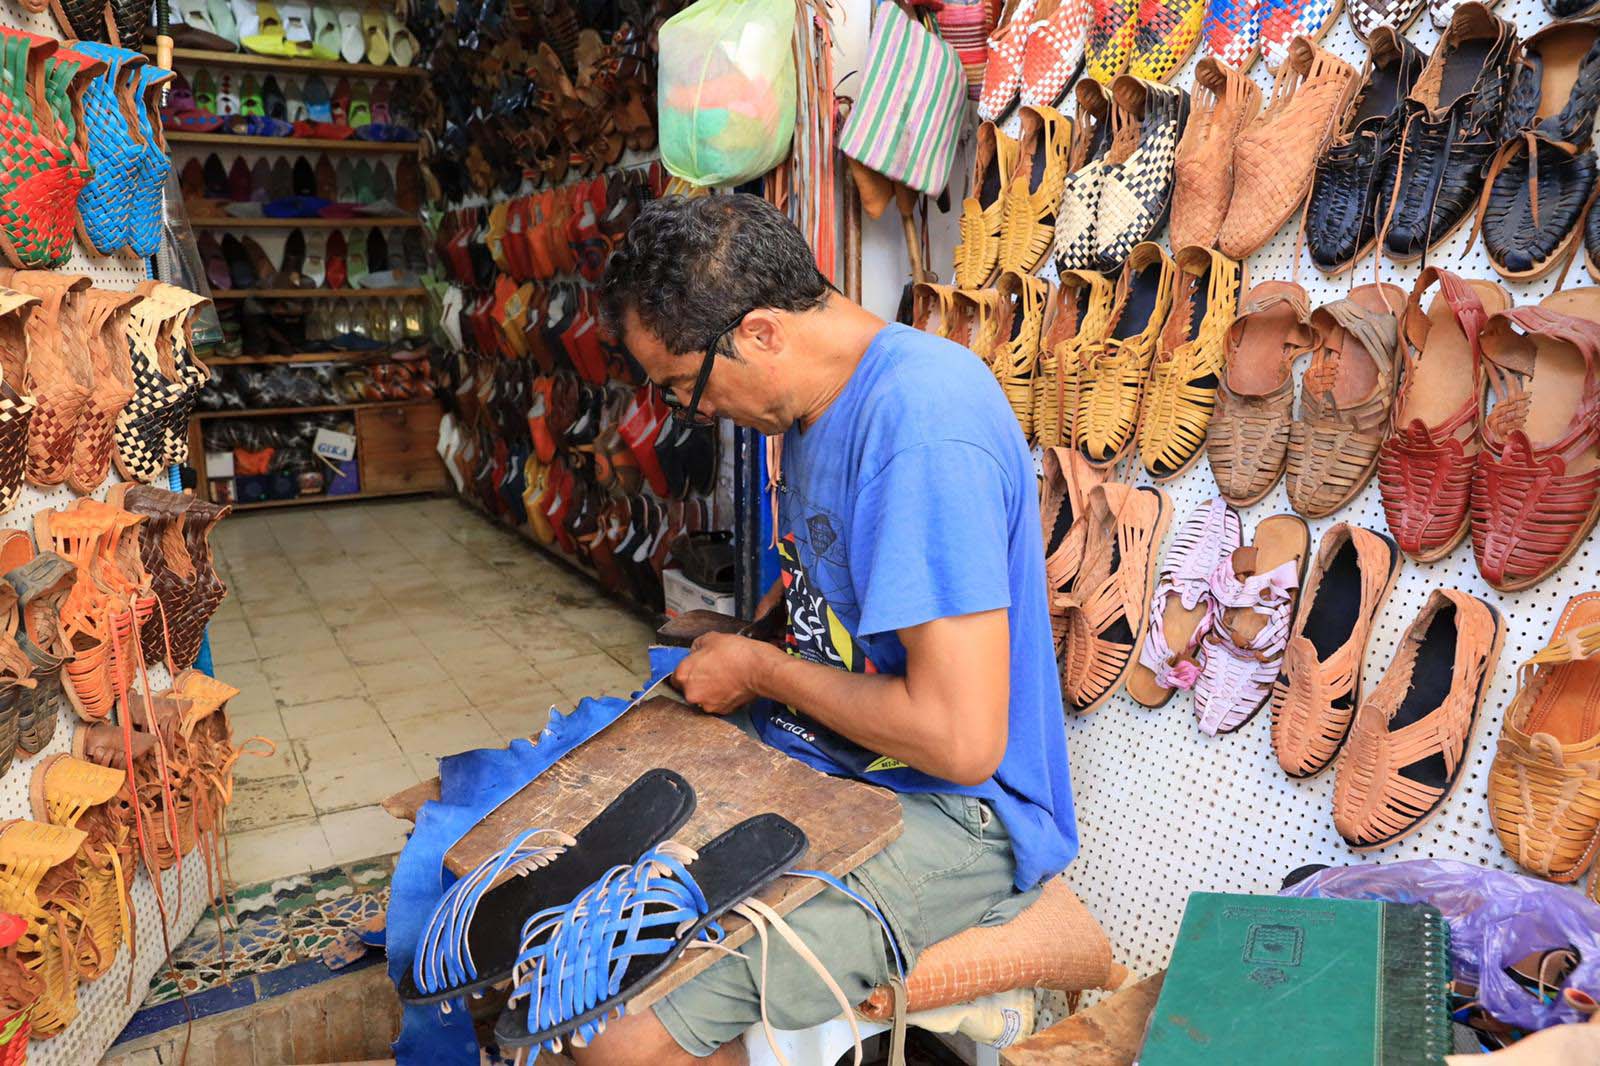 Mustapha Bel Harradia Sereghini is one of the skilled traditional shoemakers in Assilah